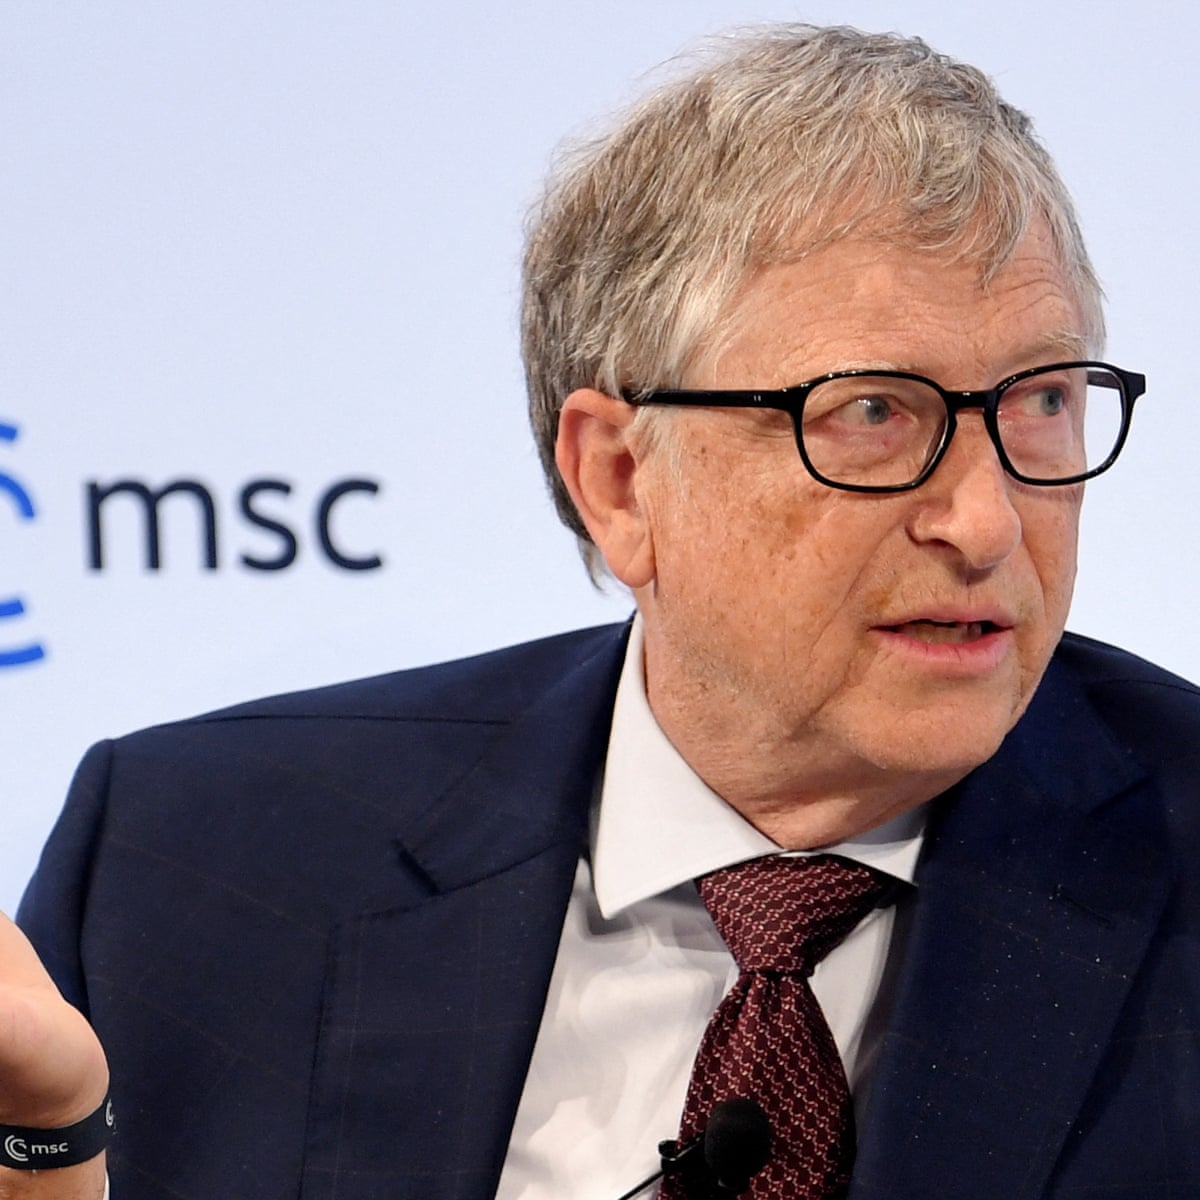 I caused pain': Bill Gates responds to allegations of affair a ...